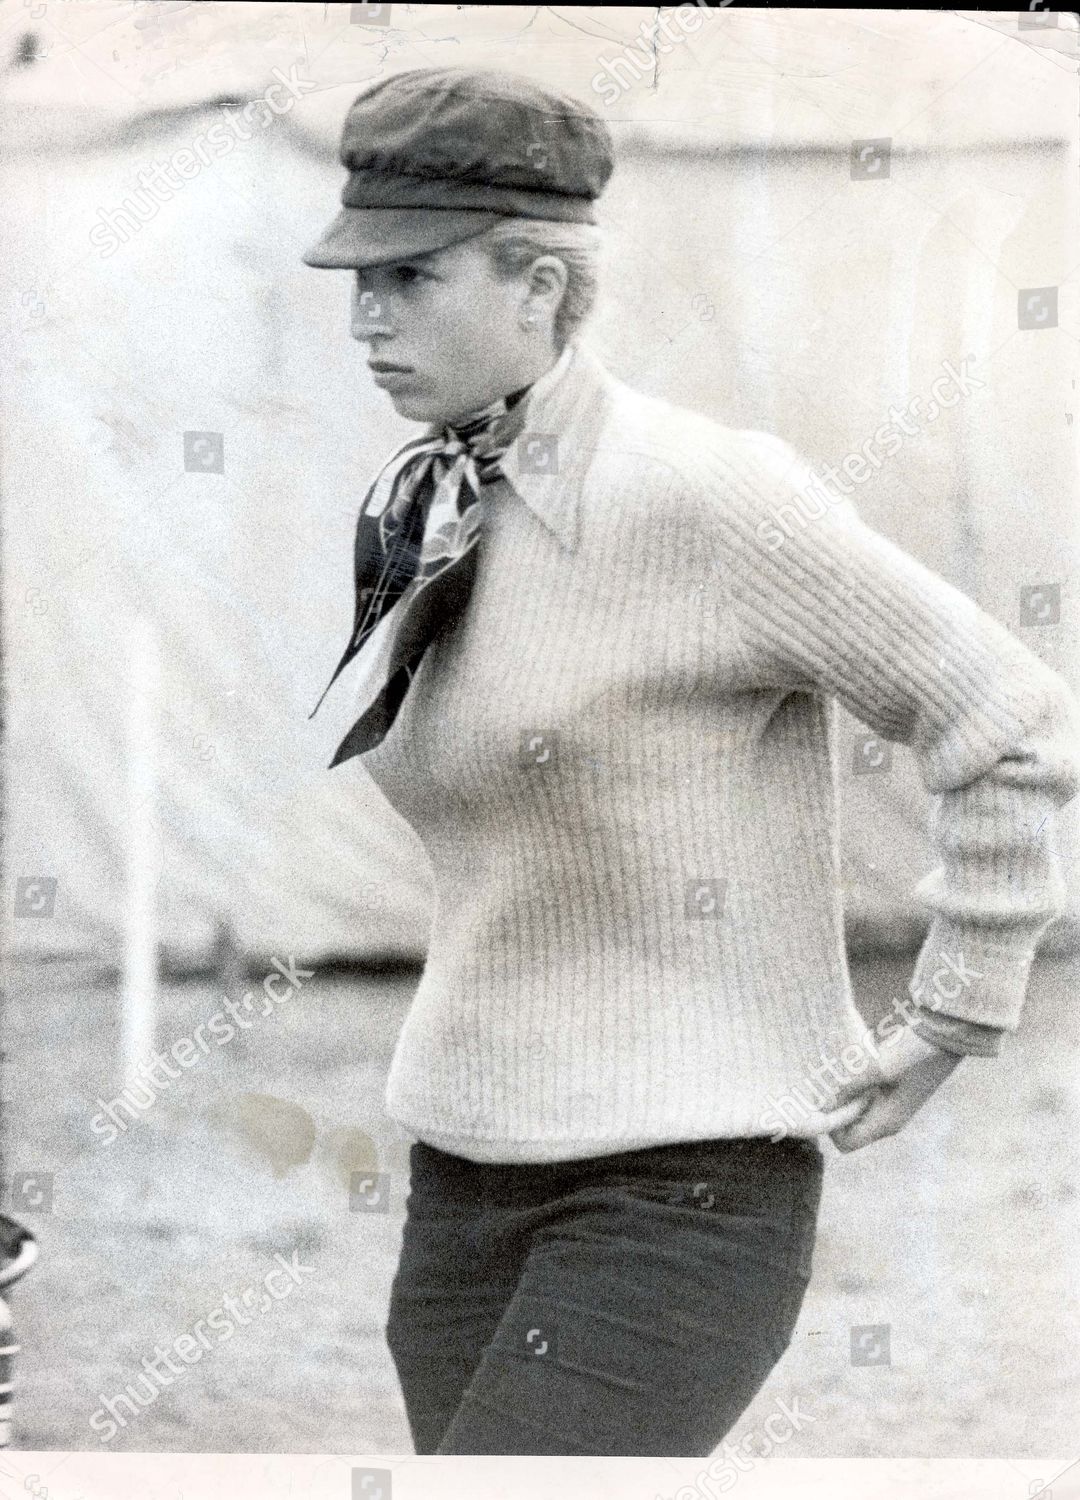 princess-anne-now-princess-royal-1972-picture-shows-princess-anne-as-a-spectator-at-burghly-horse-show-she-will-be-competing-against-the-worlds-best-riders-in-an-attempt-to-retain-the-raleigh-trophy-she-won-last-year-with-the-european-champion-shutterstock-editorial-892374a.jpg